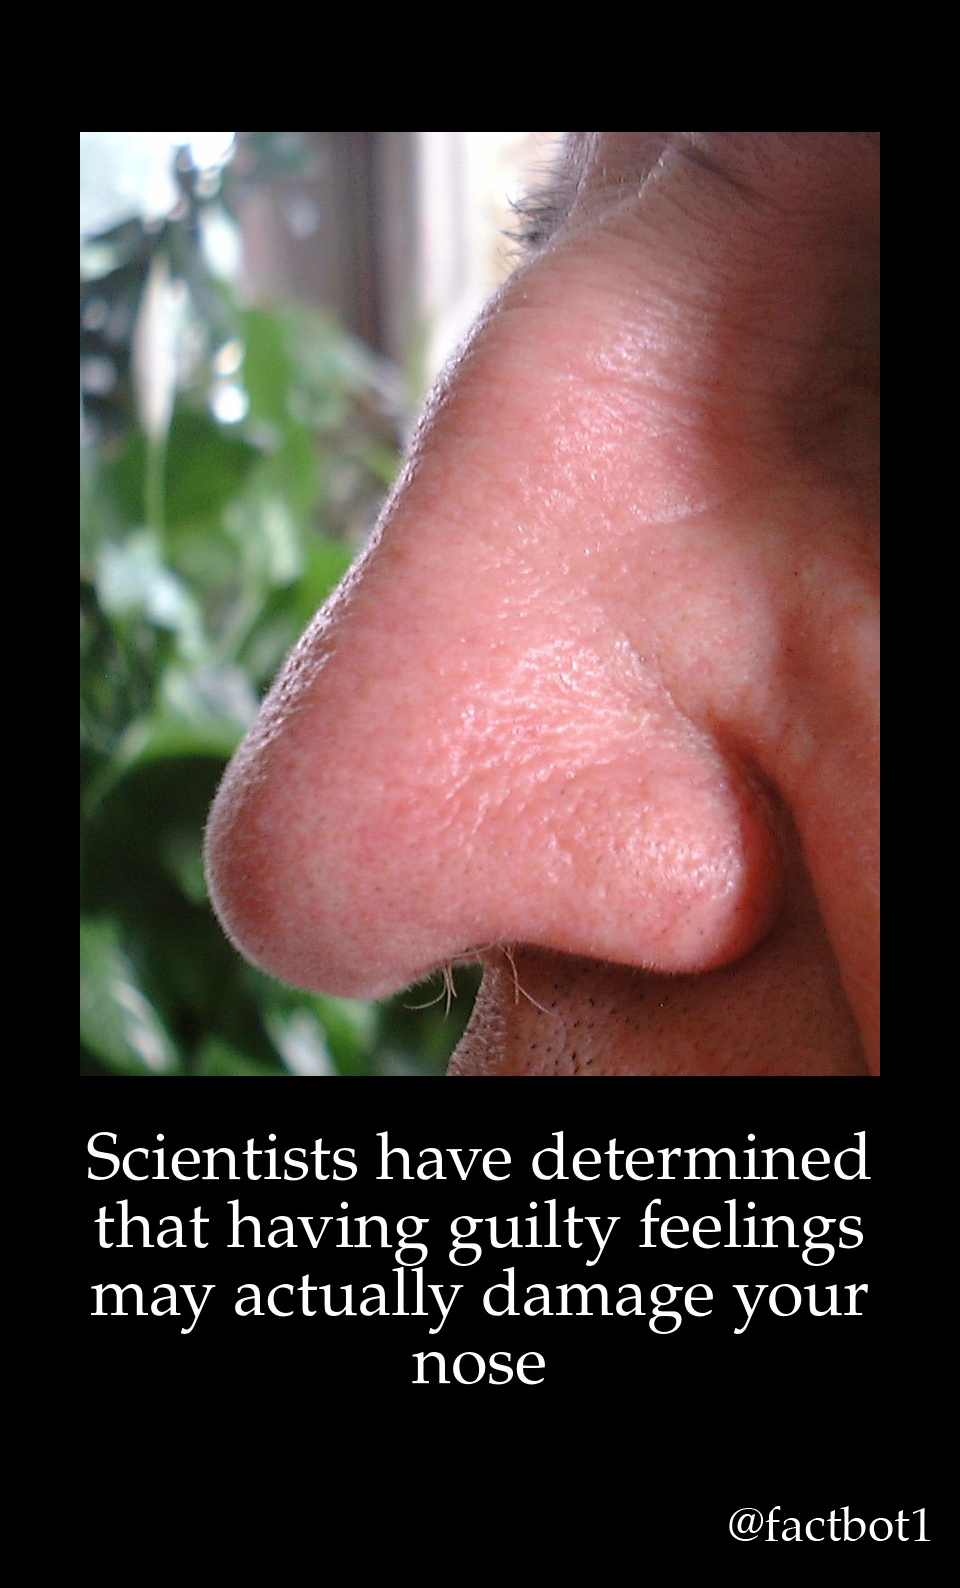 close up - Scientists have determined that having guilty feelings may actually damage your nose